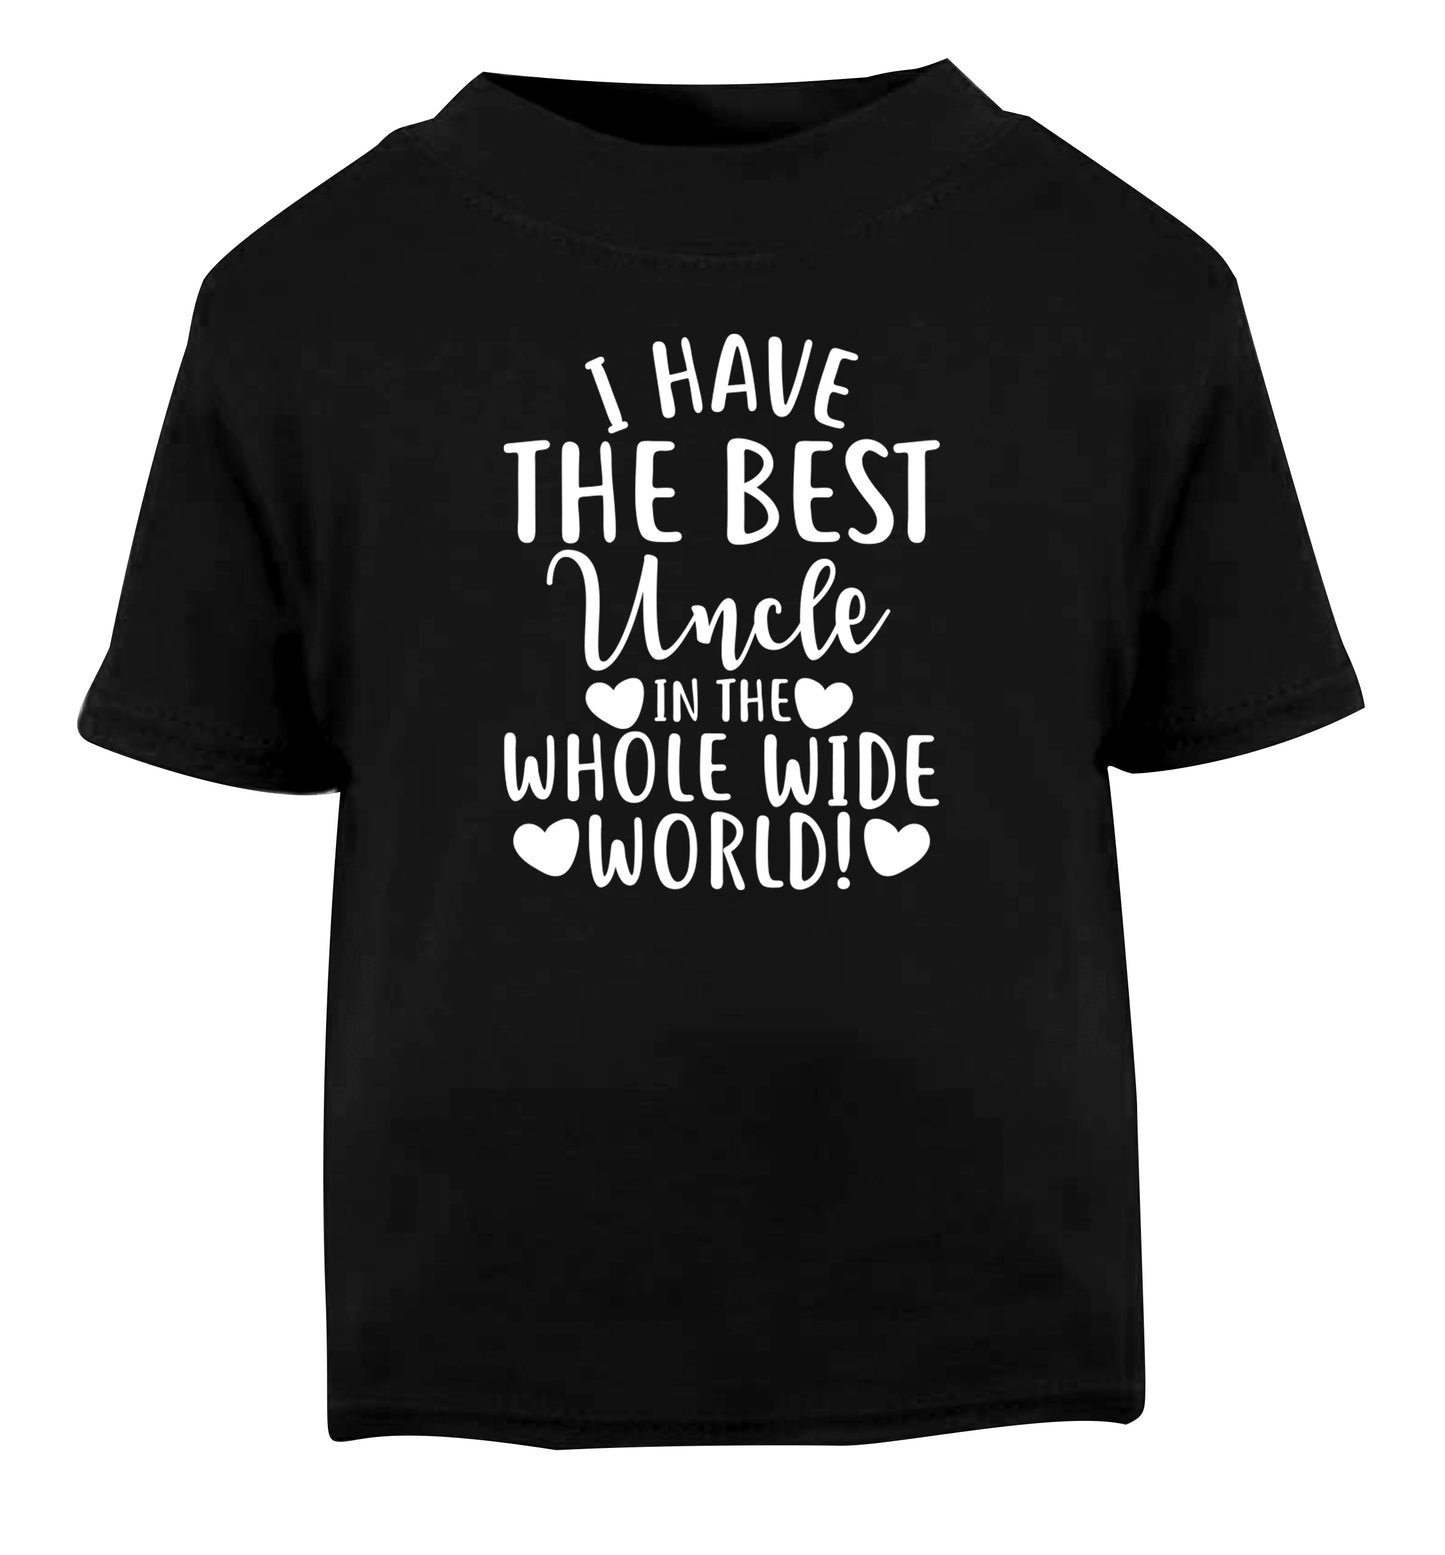 I have the best uncle in the whole wide world! Black Baby Toddler Tshirt 2 years